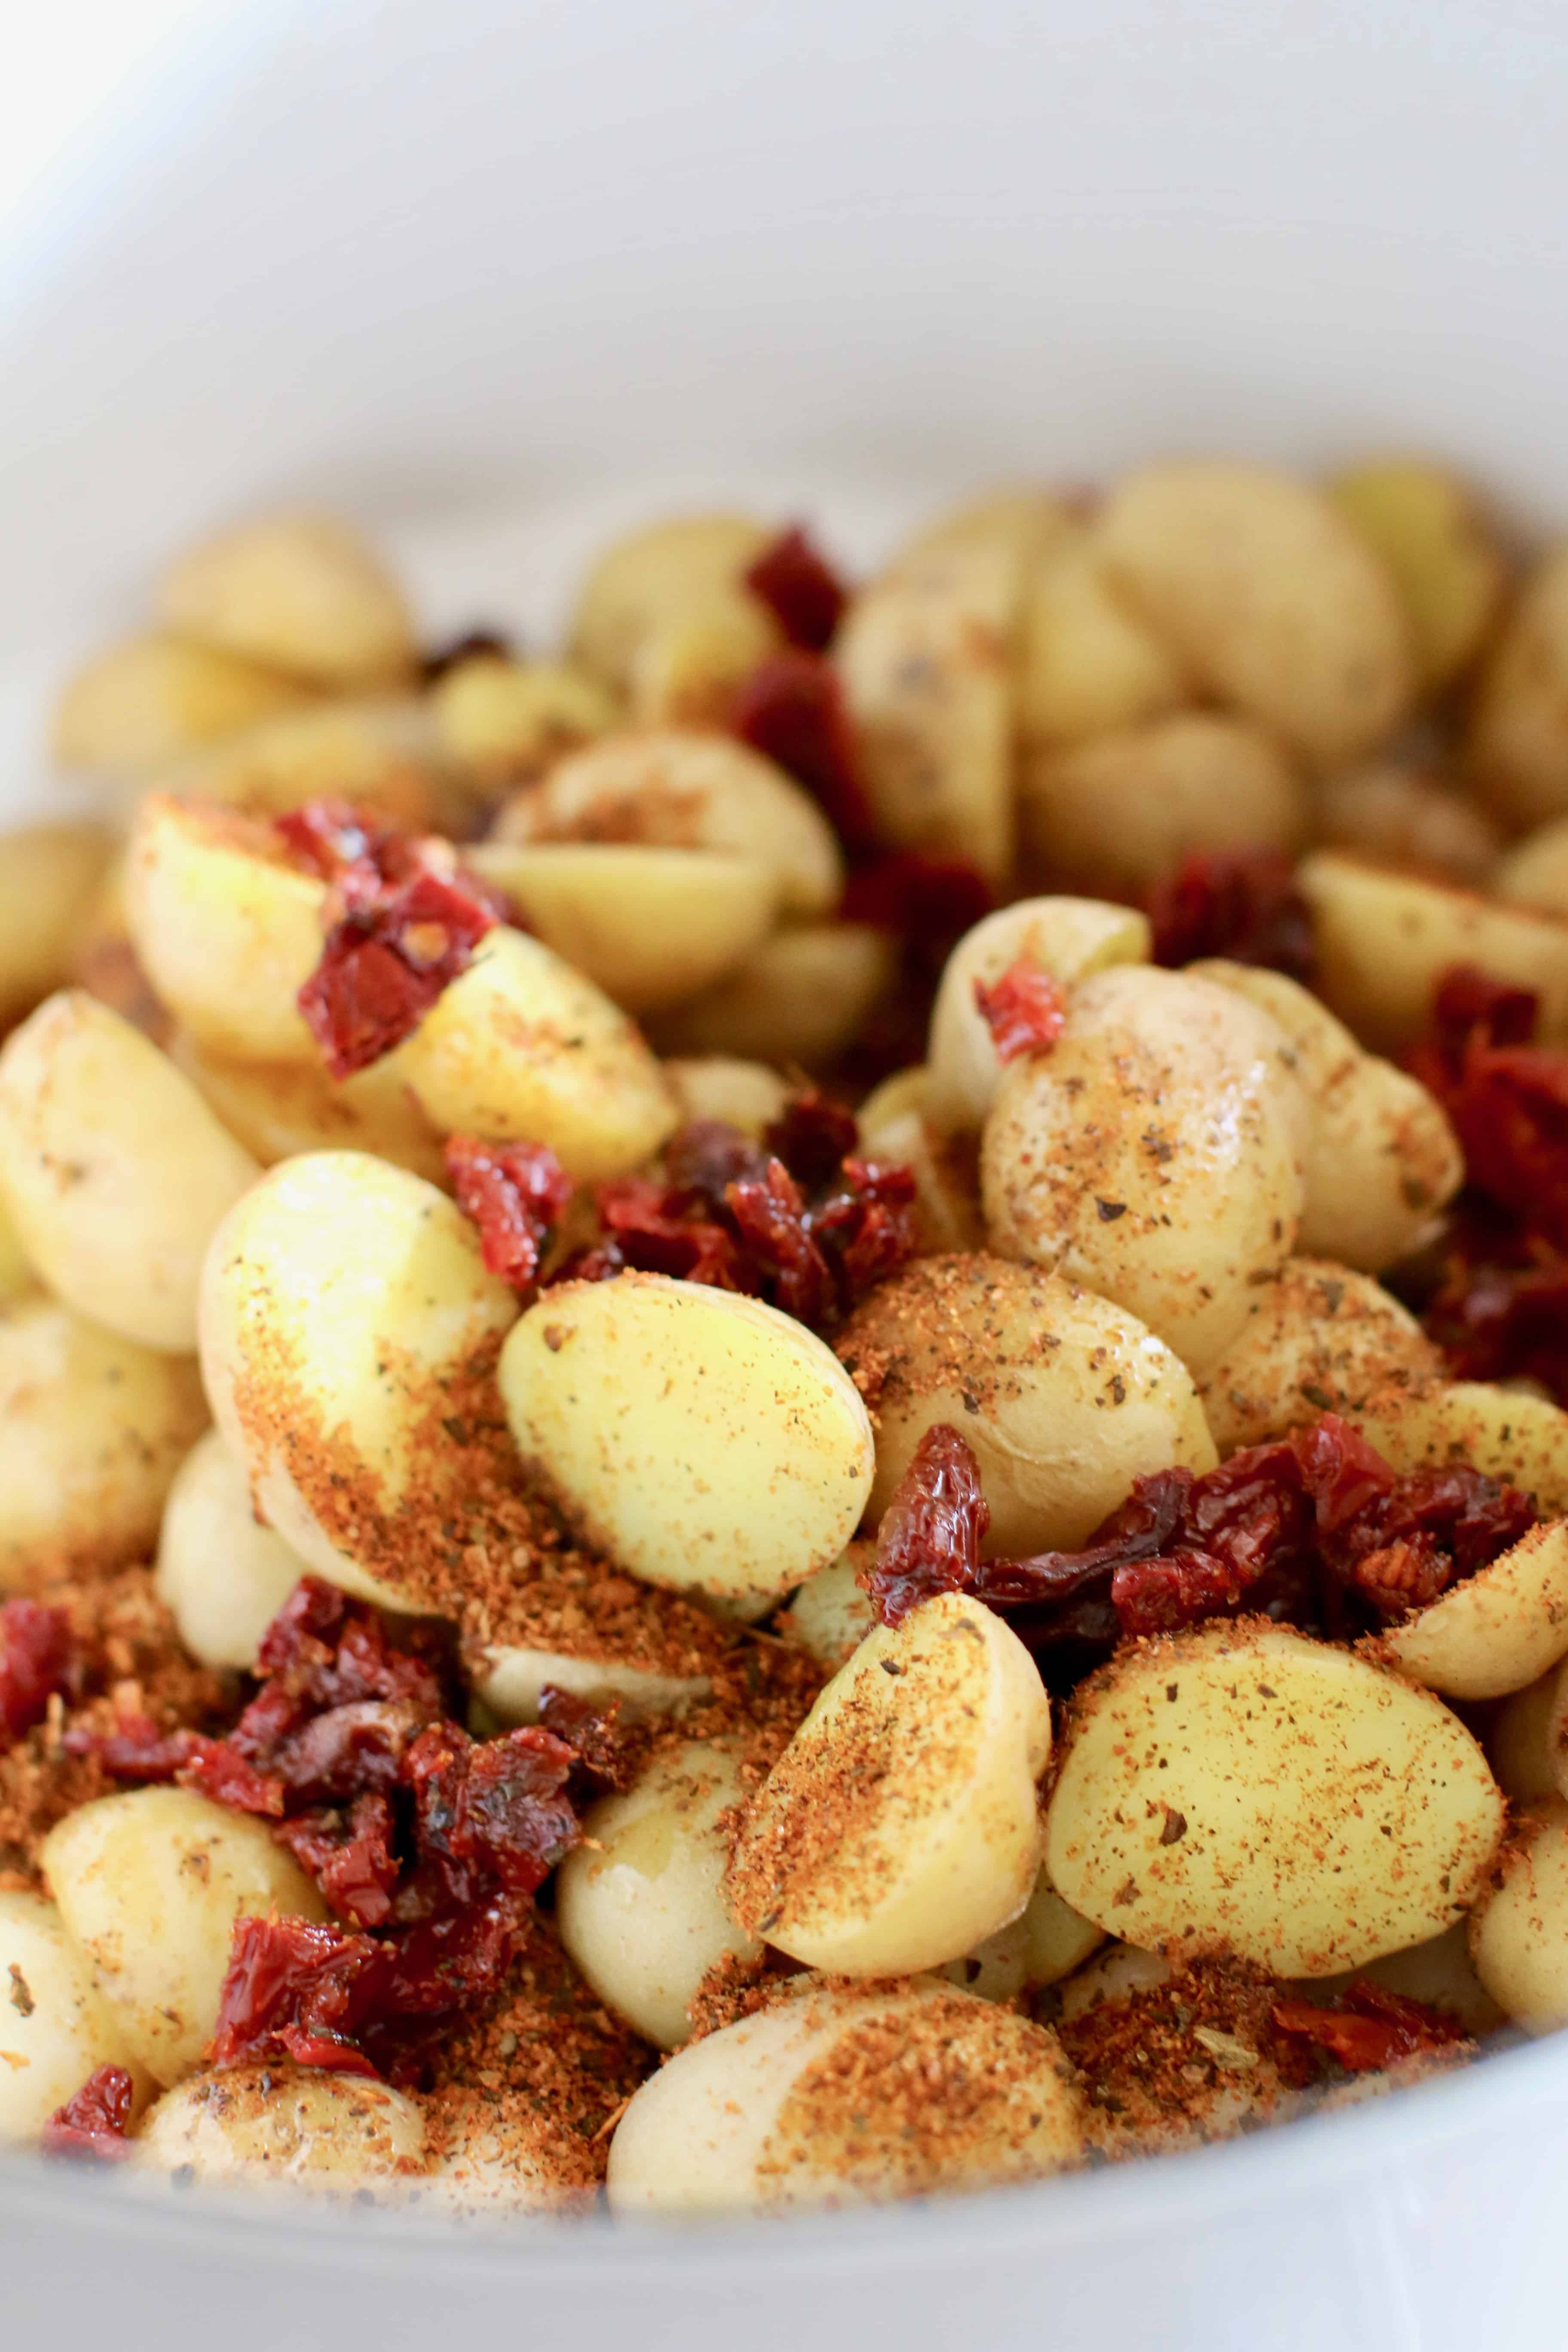 sprinkle packet of Tomato Basil seasoning on potatoes and gnocchi in a white pot.